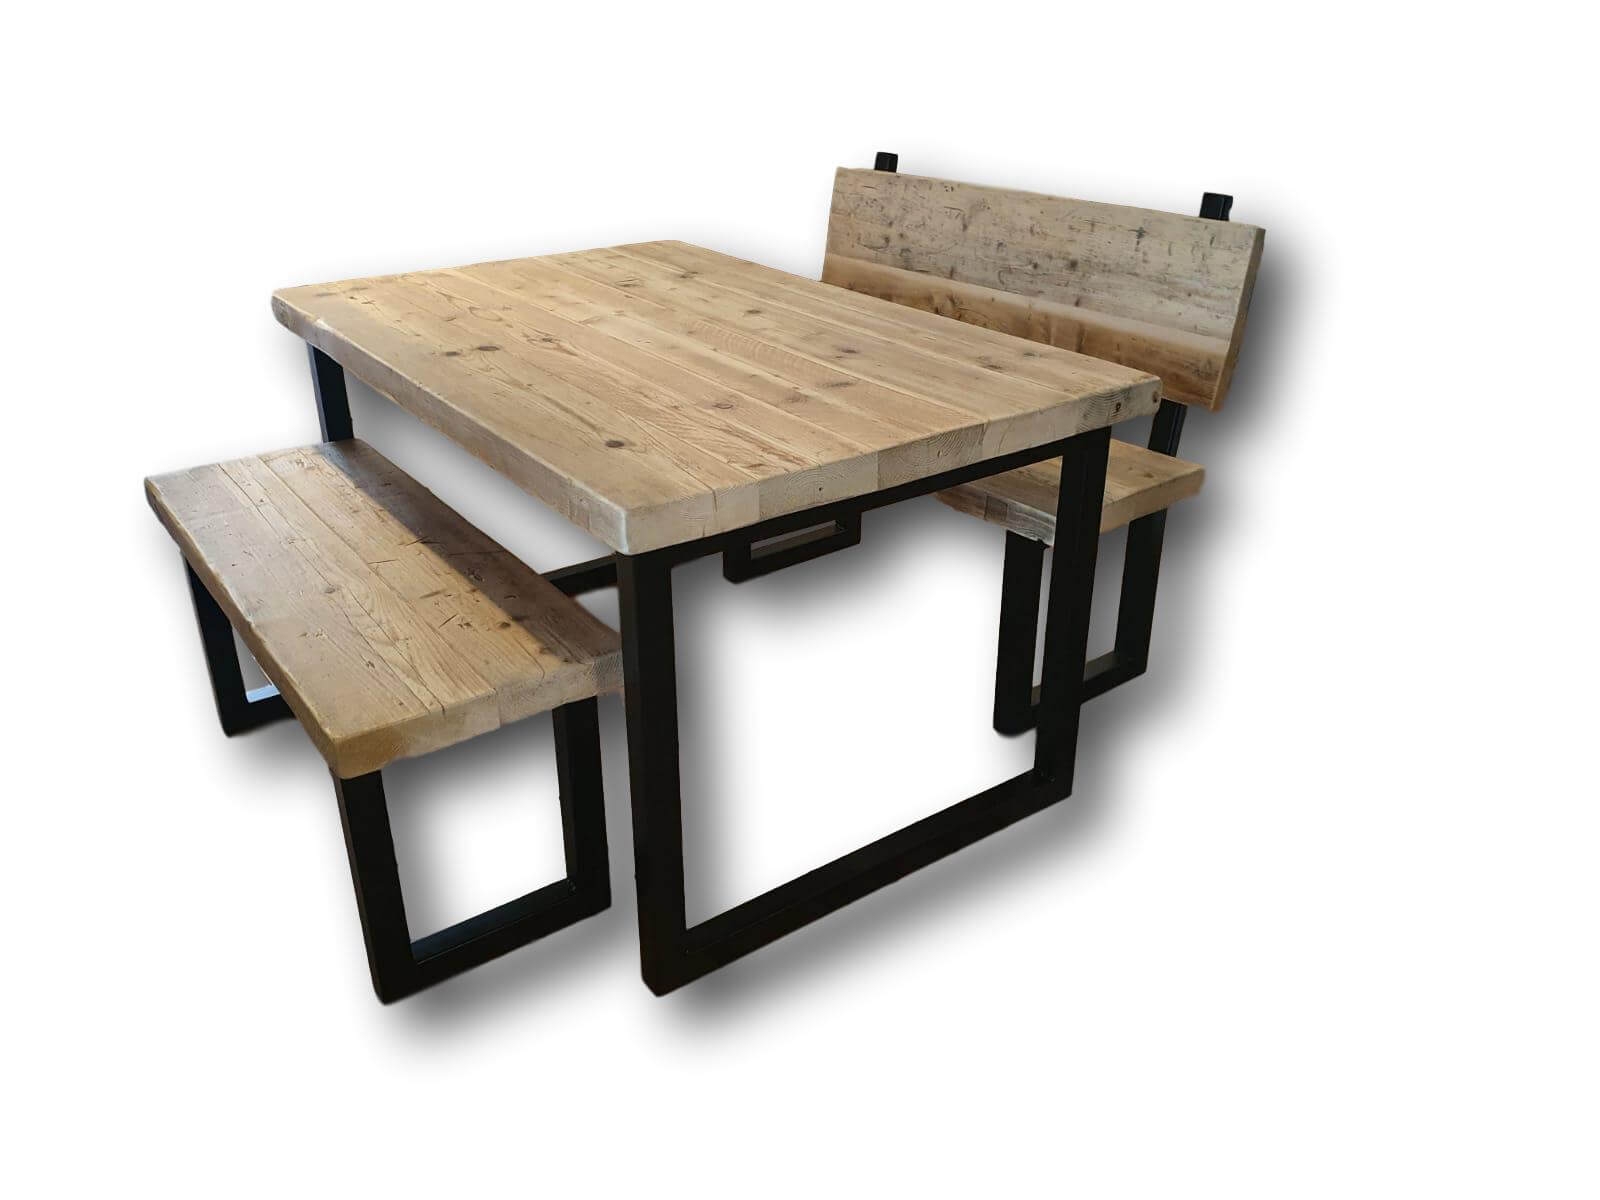 The Reclaimed Rustic Weathered Table – Design Your Own Dining Table 150cm x 90cm1 bench (same length as table) – Acumen Collection